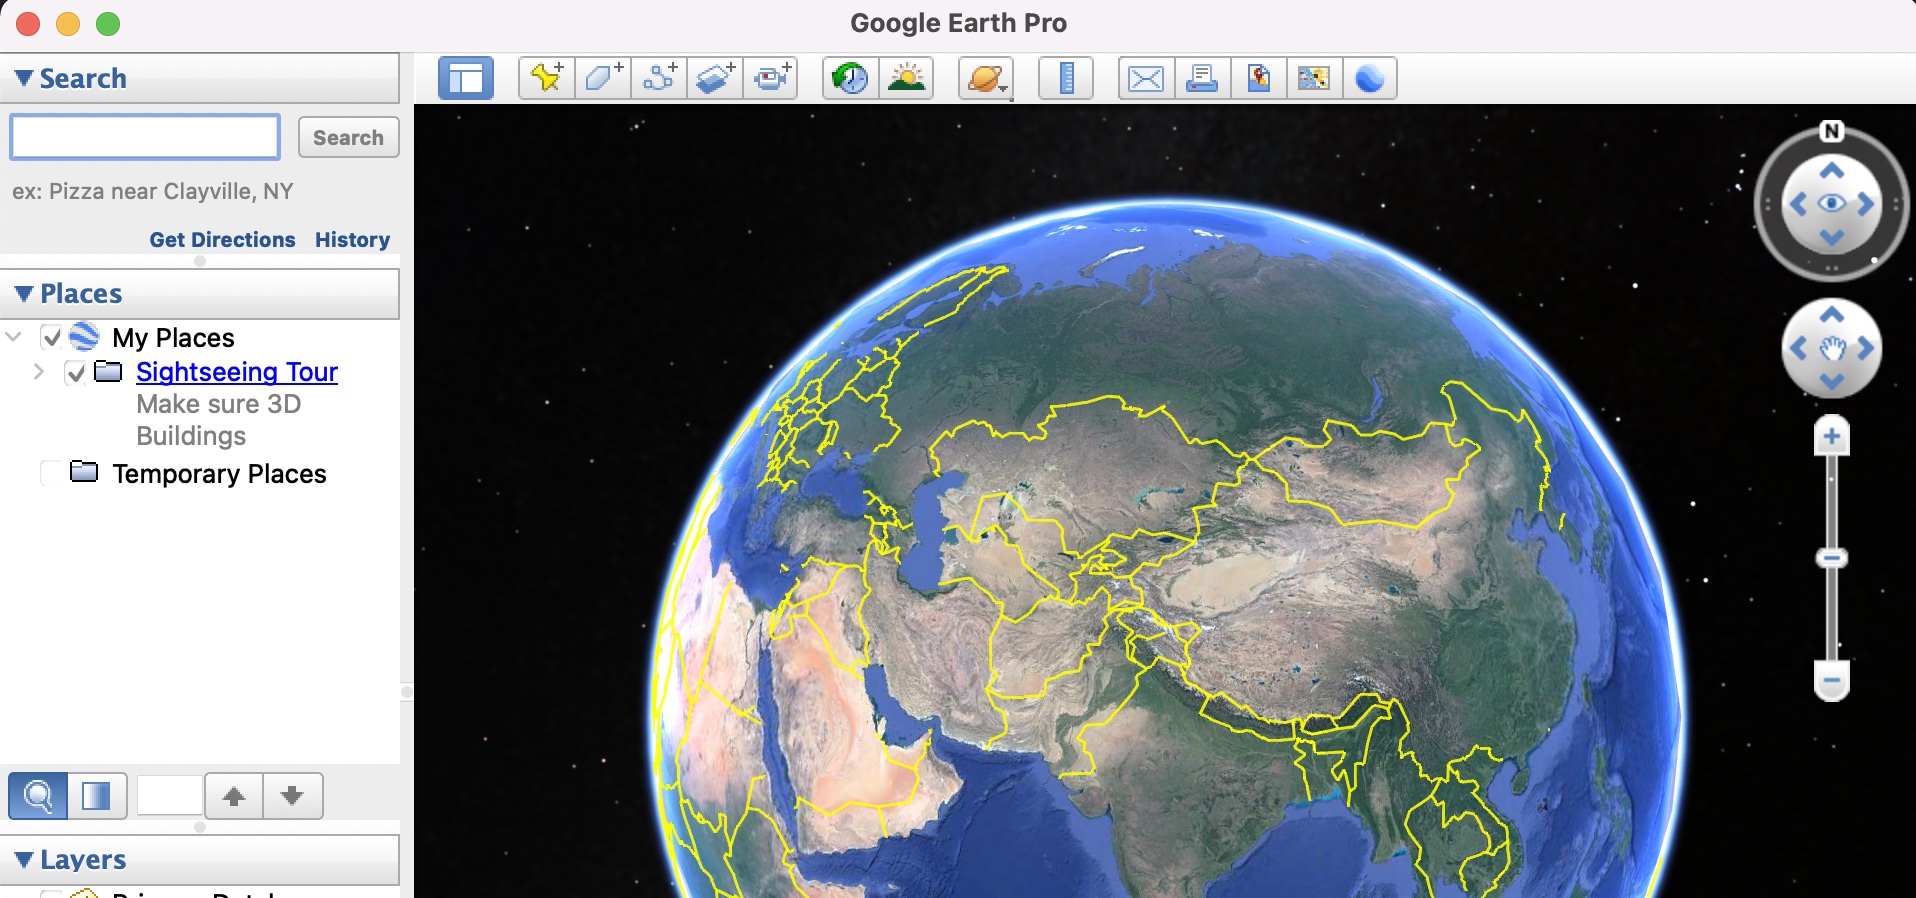 How to print a map on Google Earth